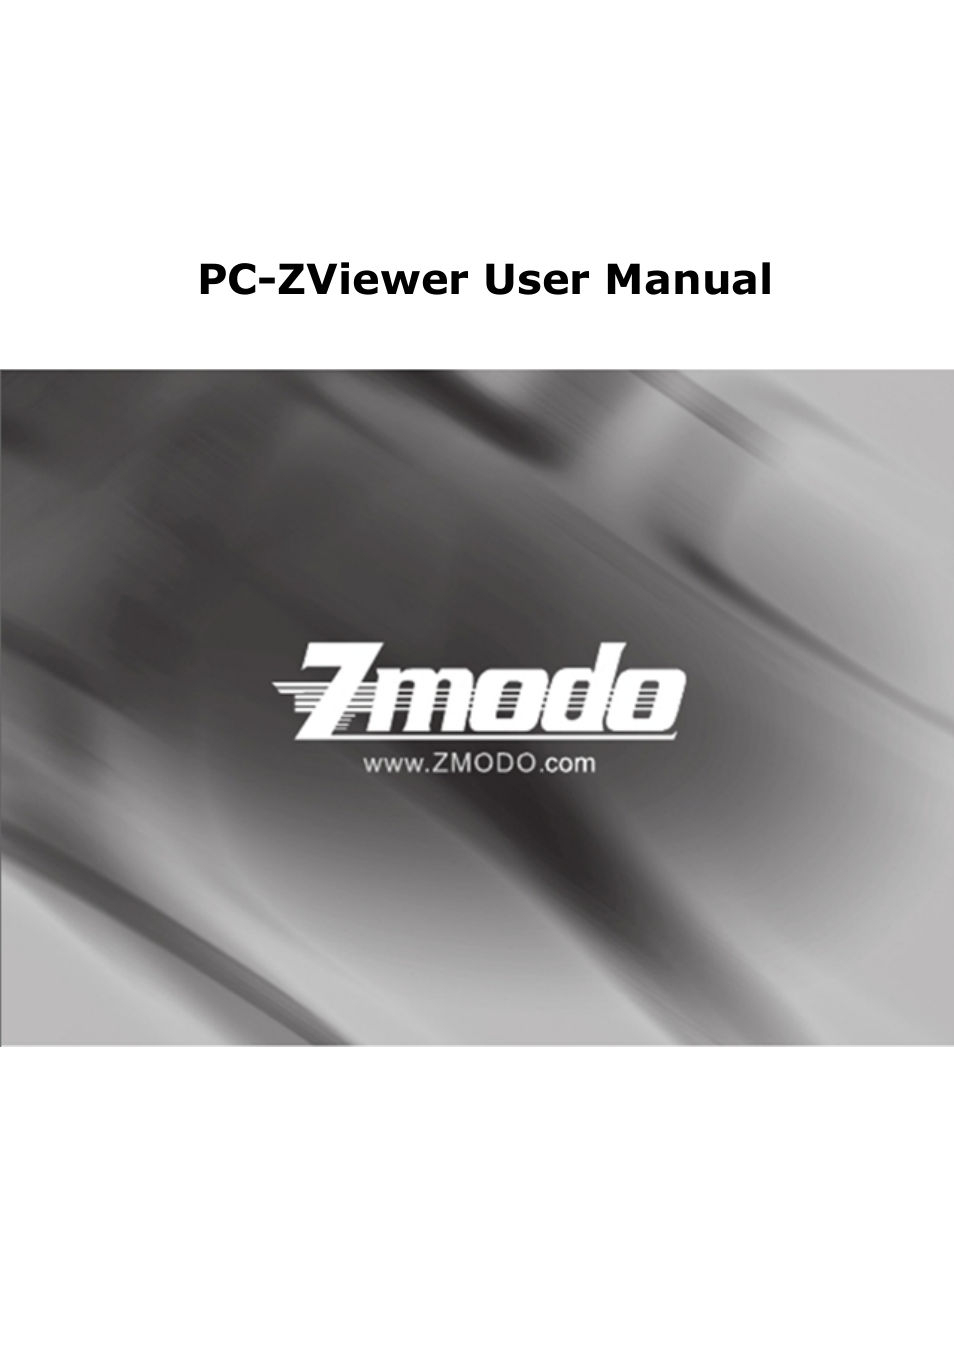 ZMODO ZP-IBH13-P 720P HD H.264 PoE IP Infrared Weatherproof Camera with QR Code Smartphone Setup - Zviewer Windows User Manual User Manual | 39 pages